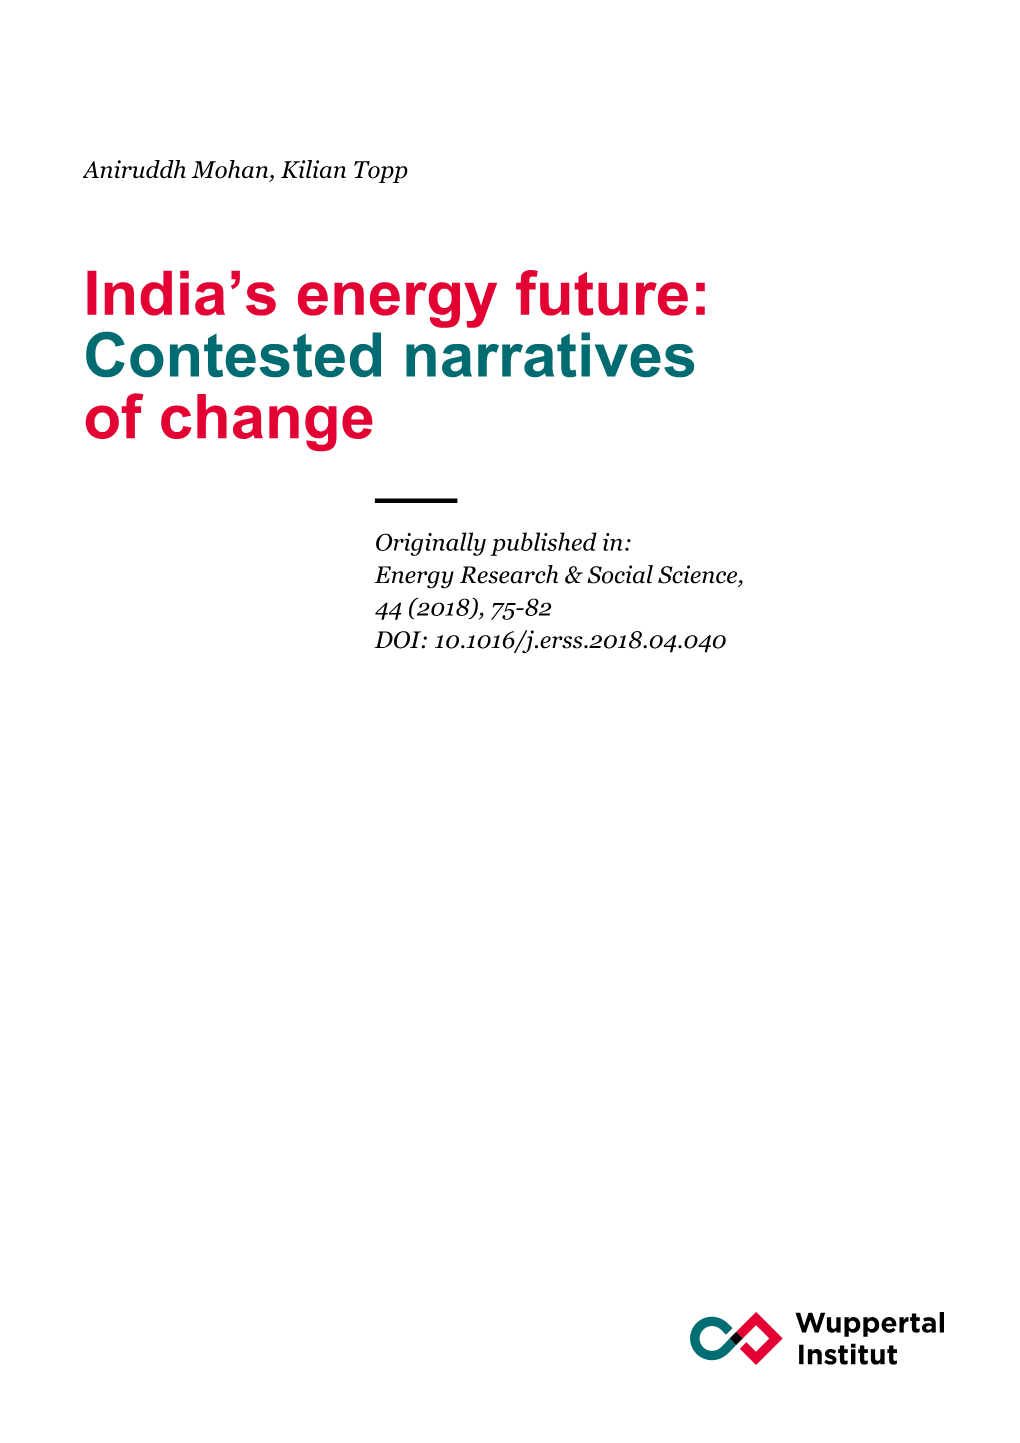 India's Energy Future: Contested Narratives of Change